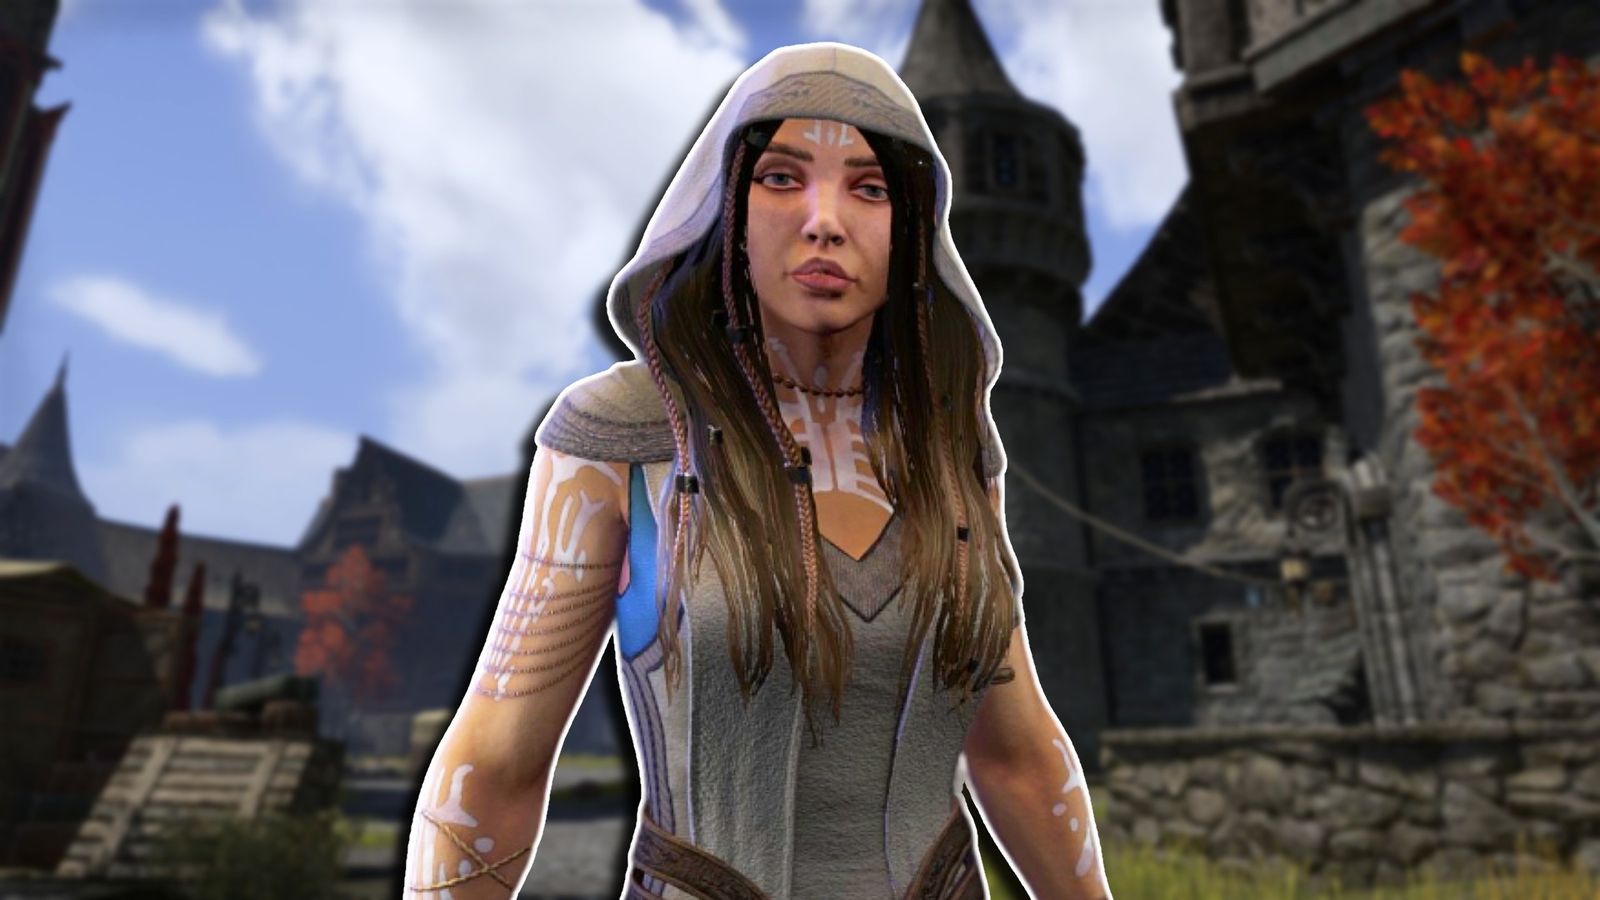 Ithelia from ESO Gold Road wearing a hood and looking directly towards the camera, placed against a blurred background of Skingrad.